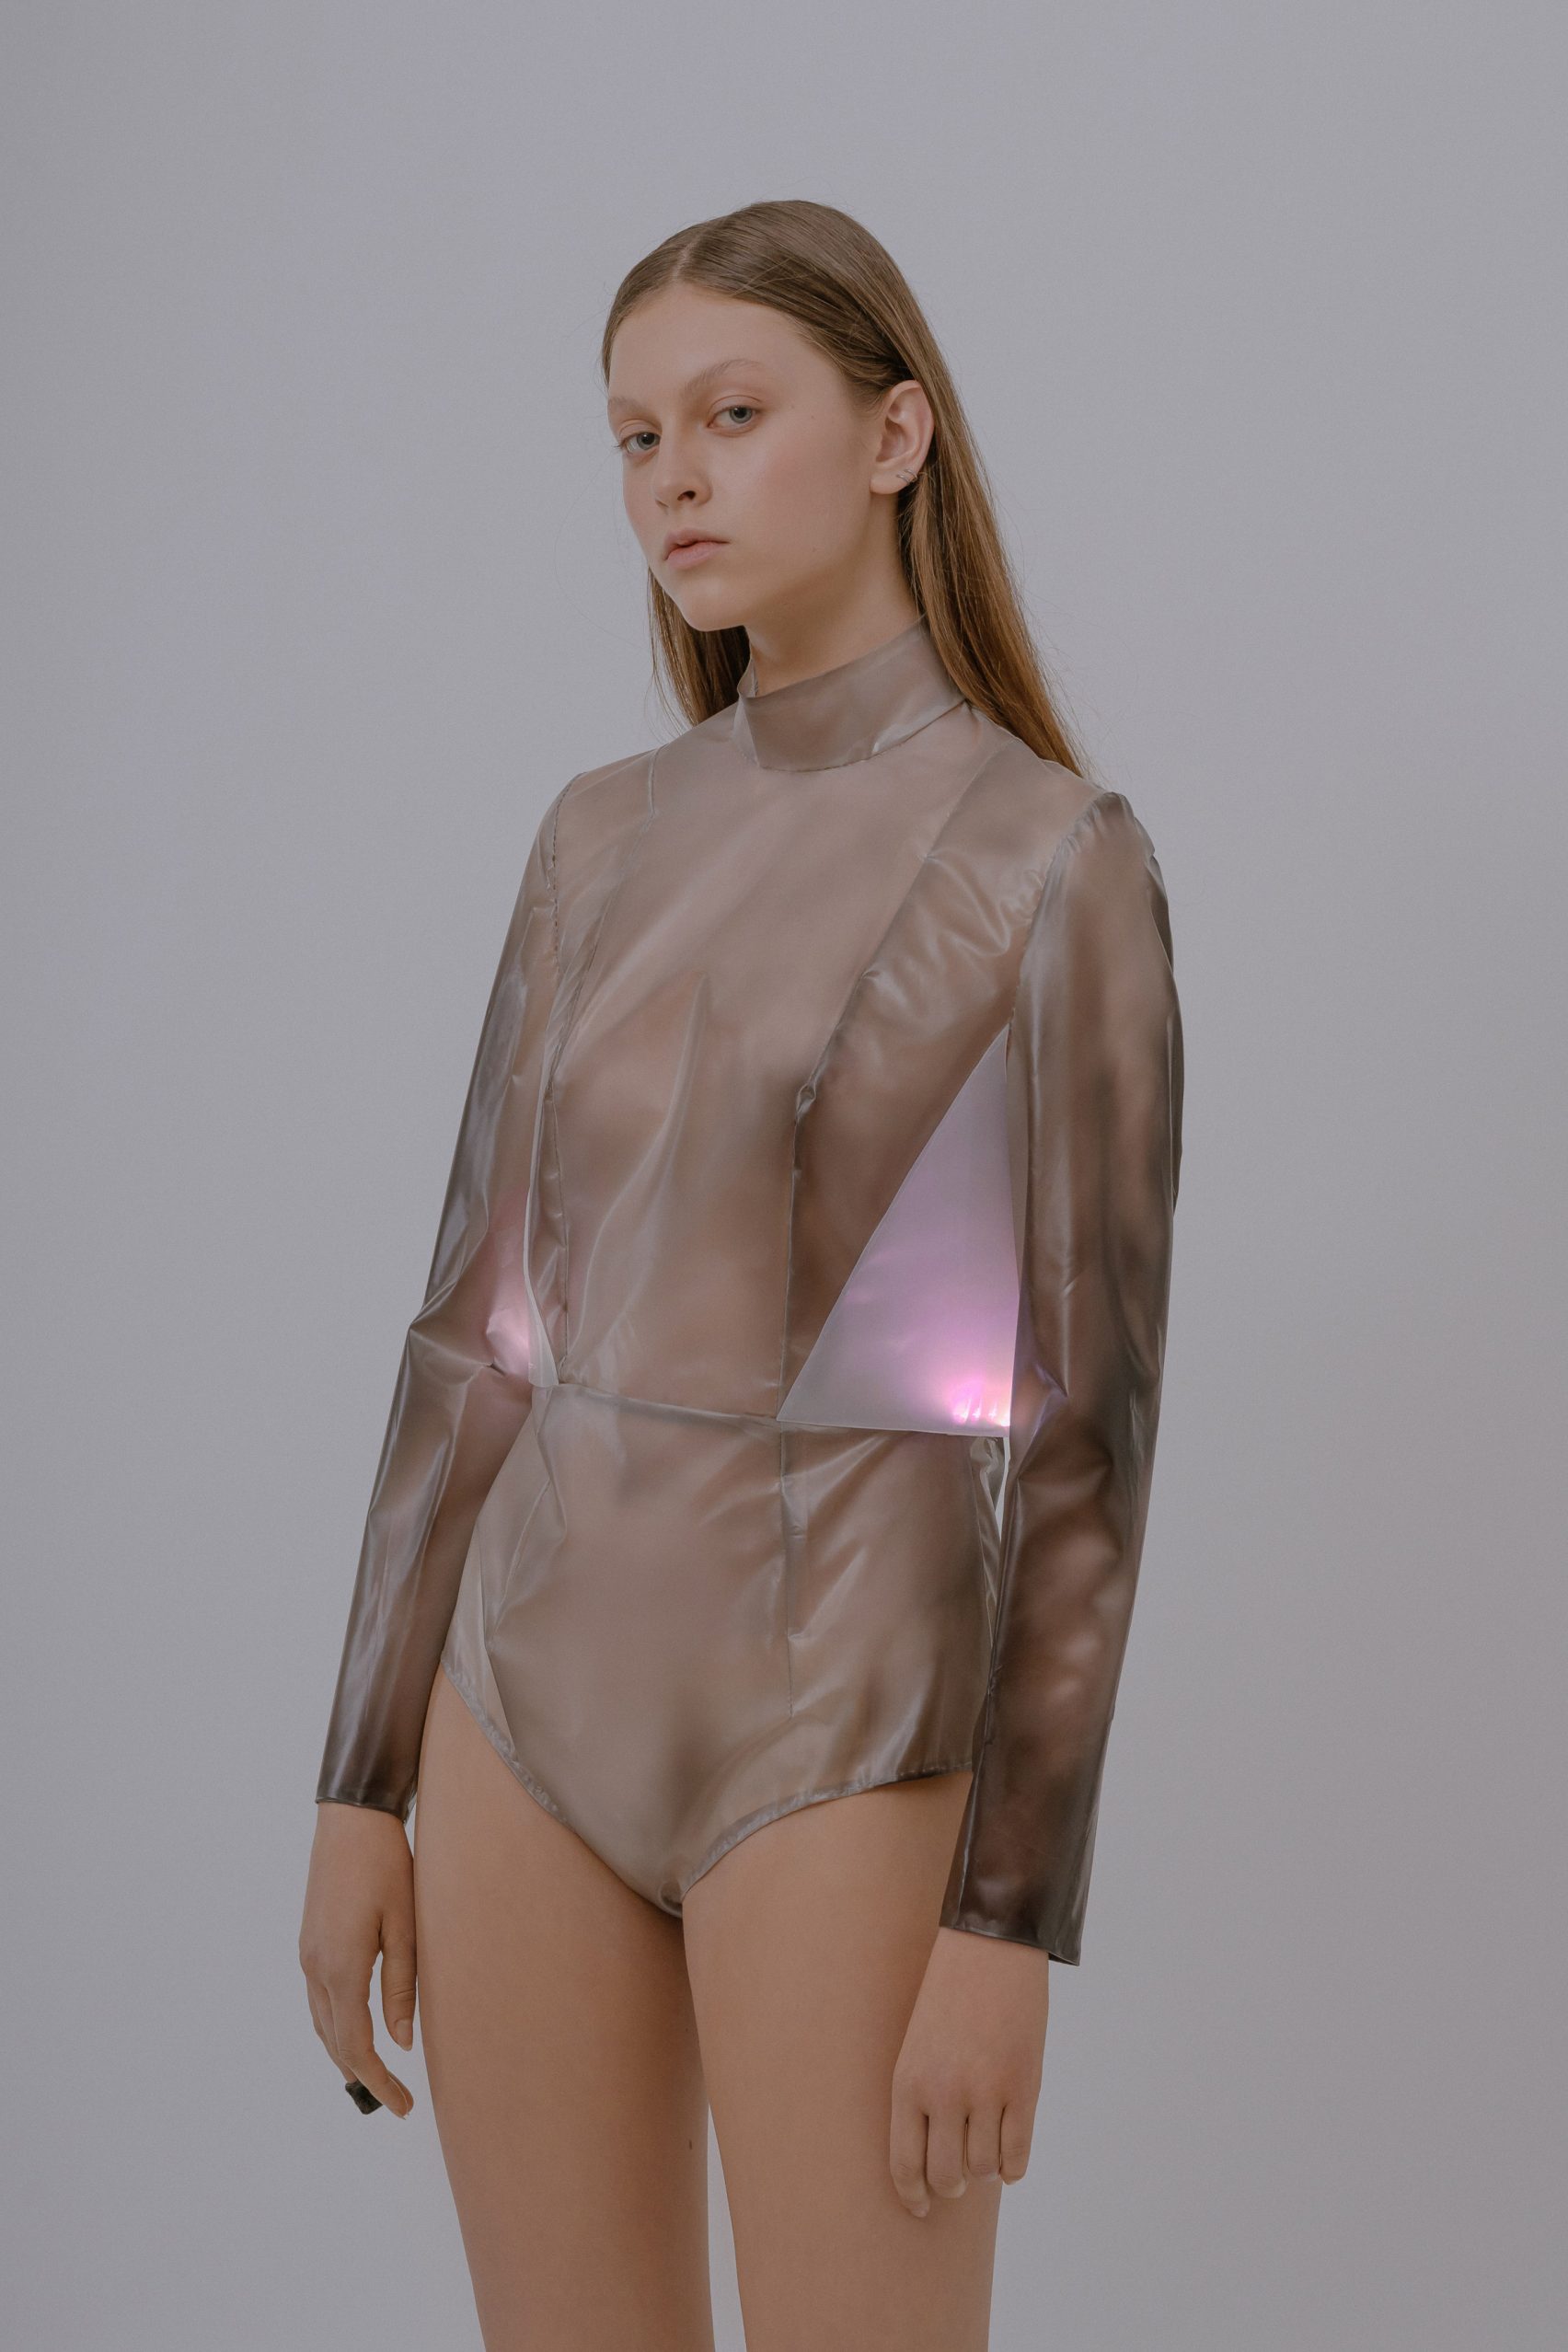 A see through top from Iga Węglińska's collection